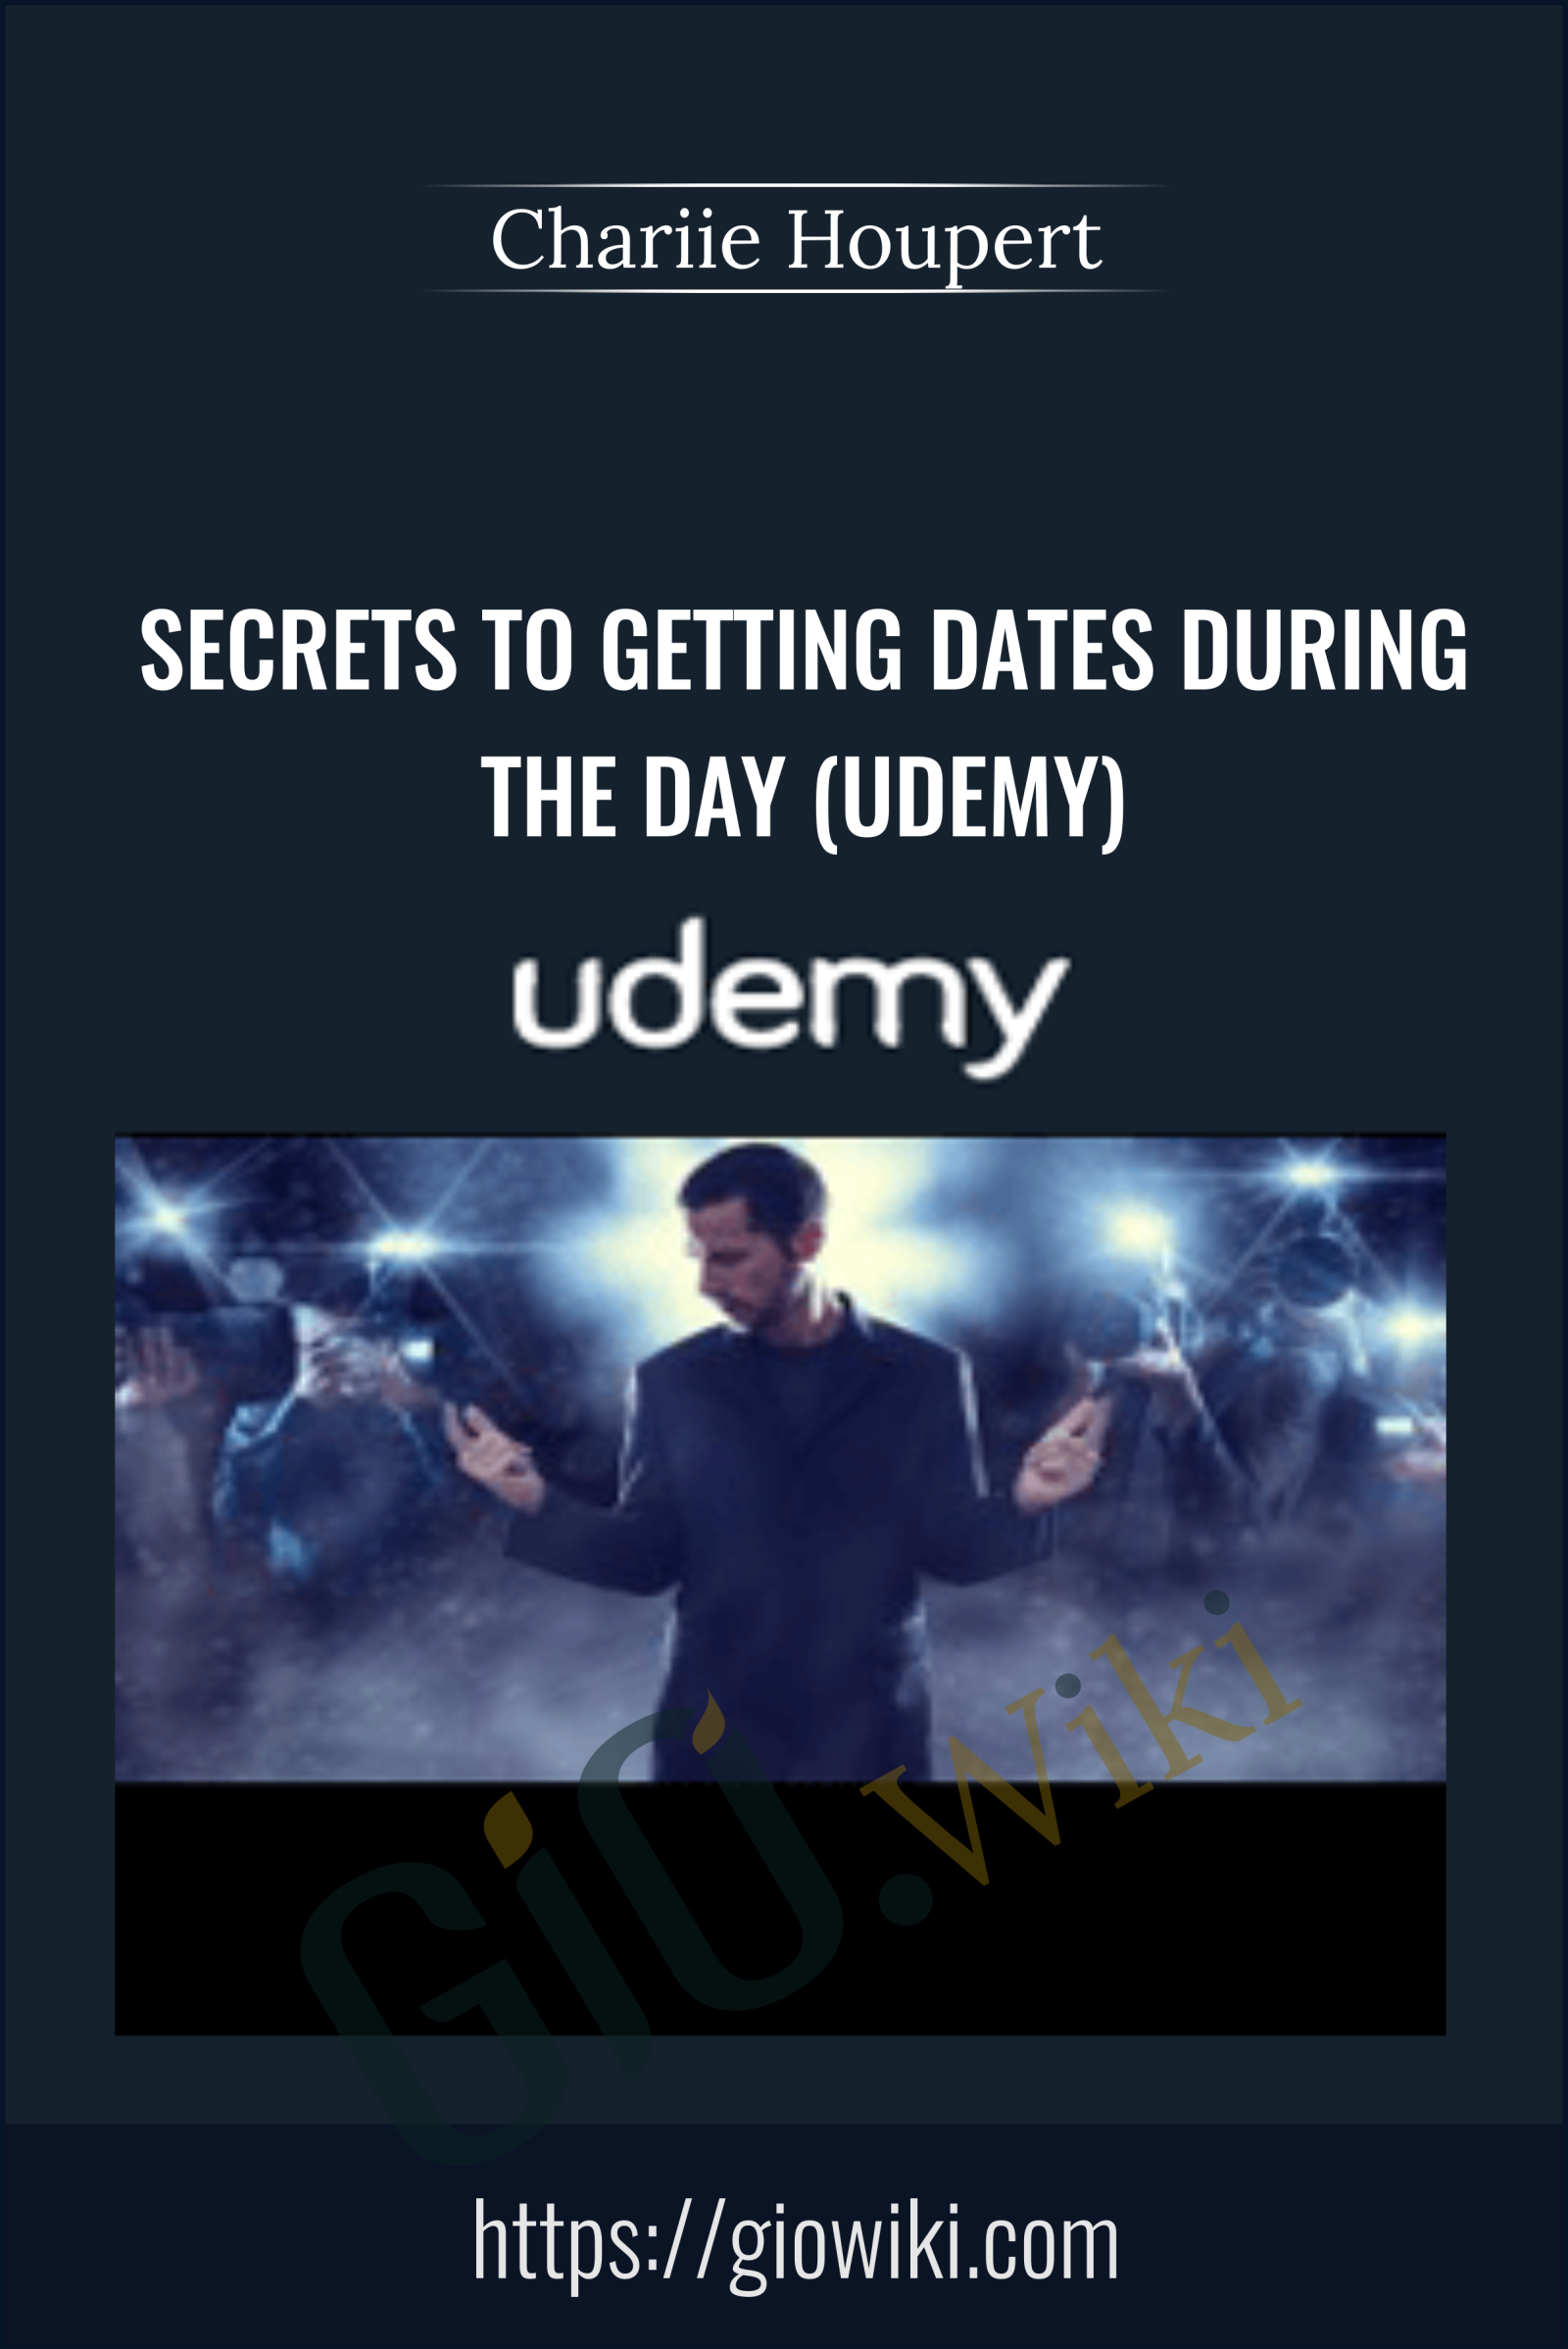 Secrets to Getting Dates During the Day (Udemy) - Chariie Houpert